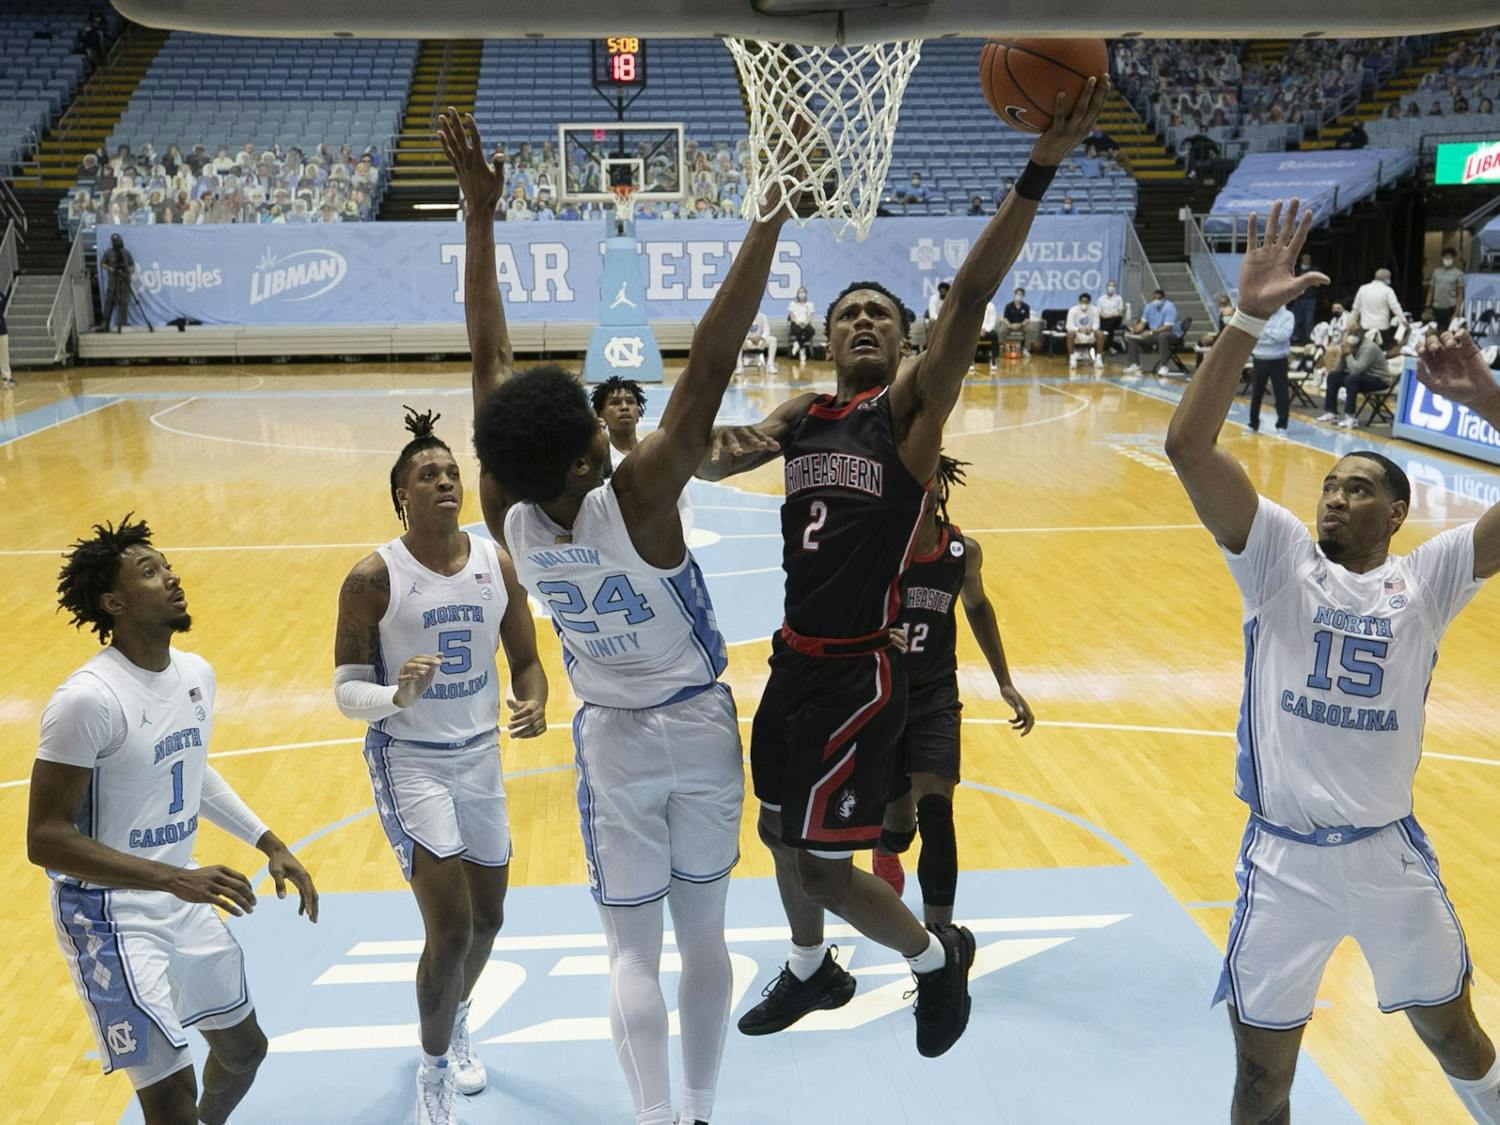 Northeastern’s Tyson Walker (2) drives to the basket for two of his game high 27 points during the second half against North Carolina on Wednesday, February 17, 2021 at the Smith Center in Chapel Hill, N.C. Photo courtesy of Robert Willett.